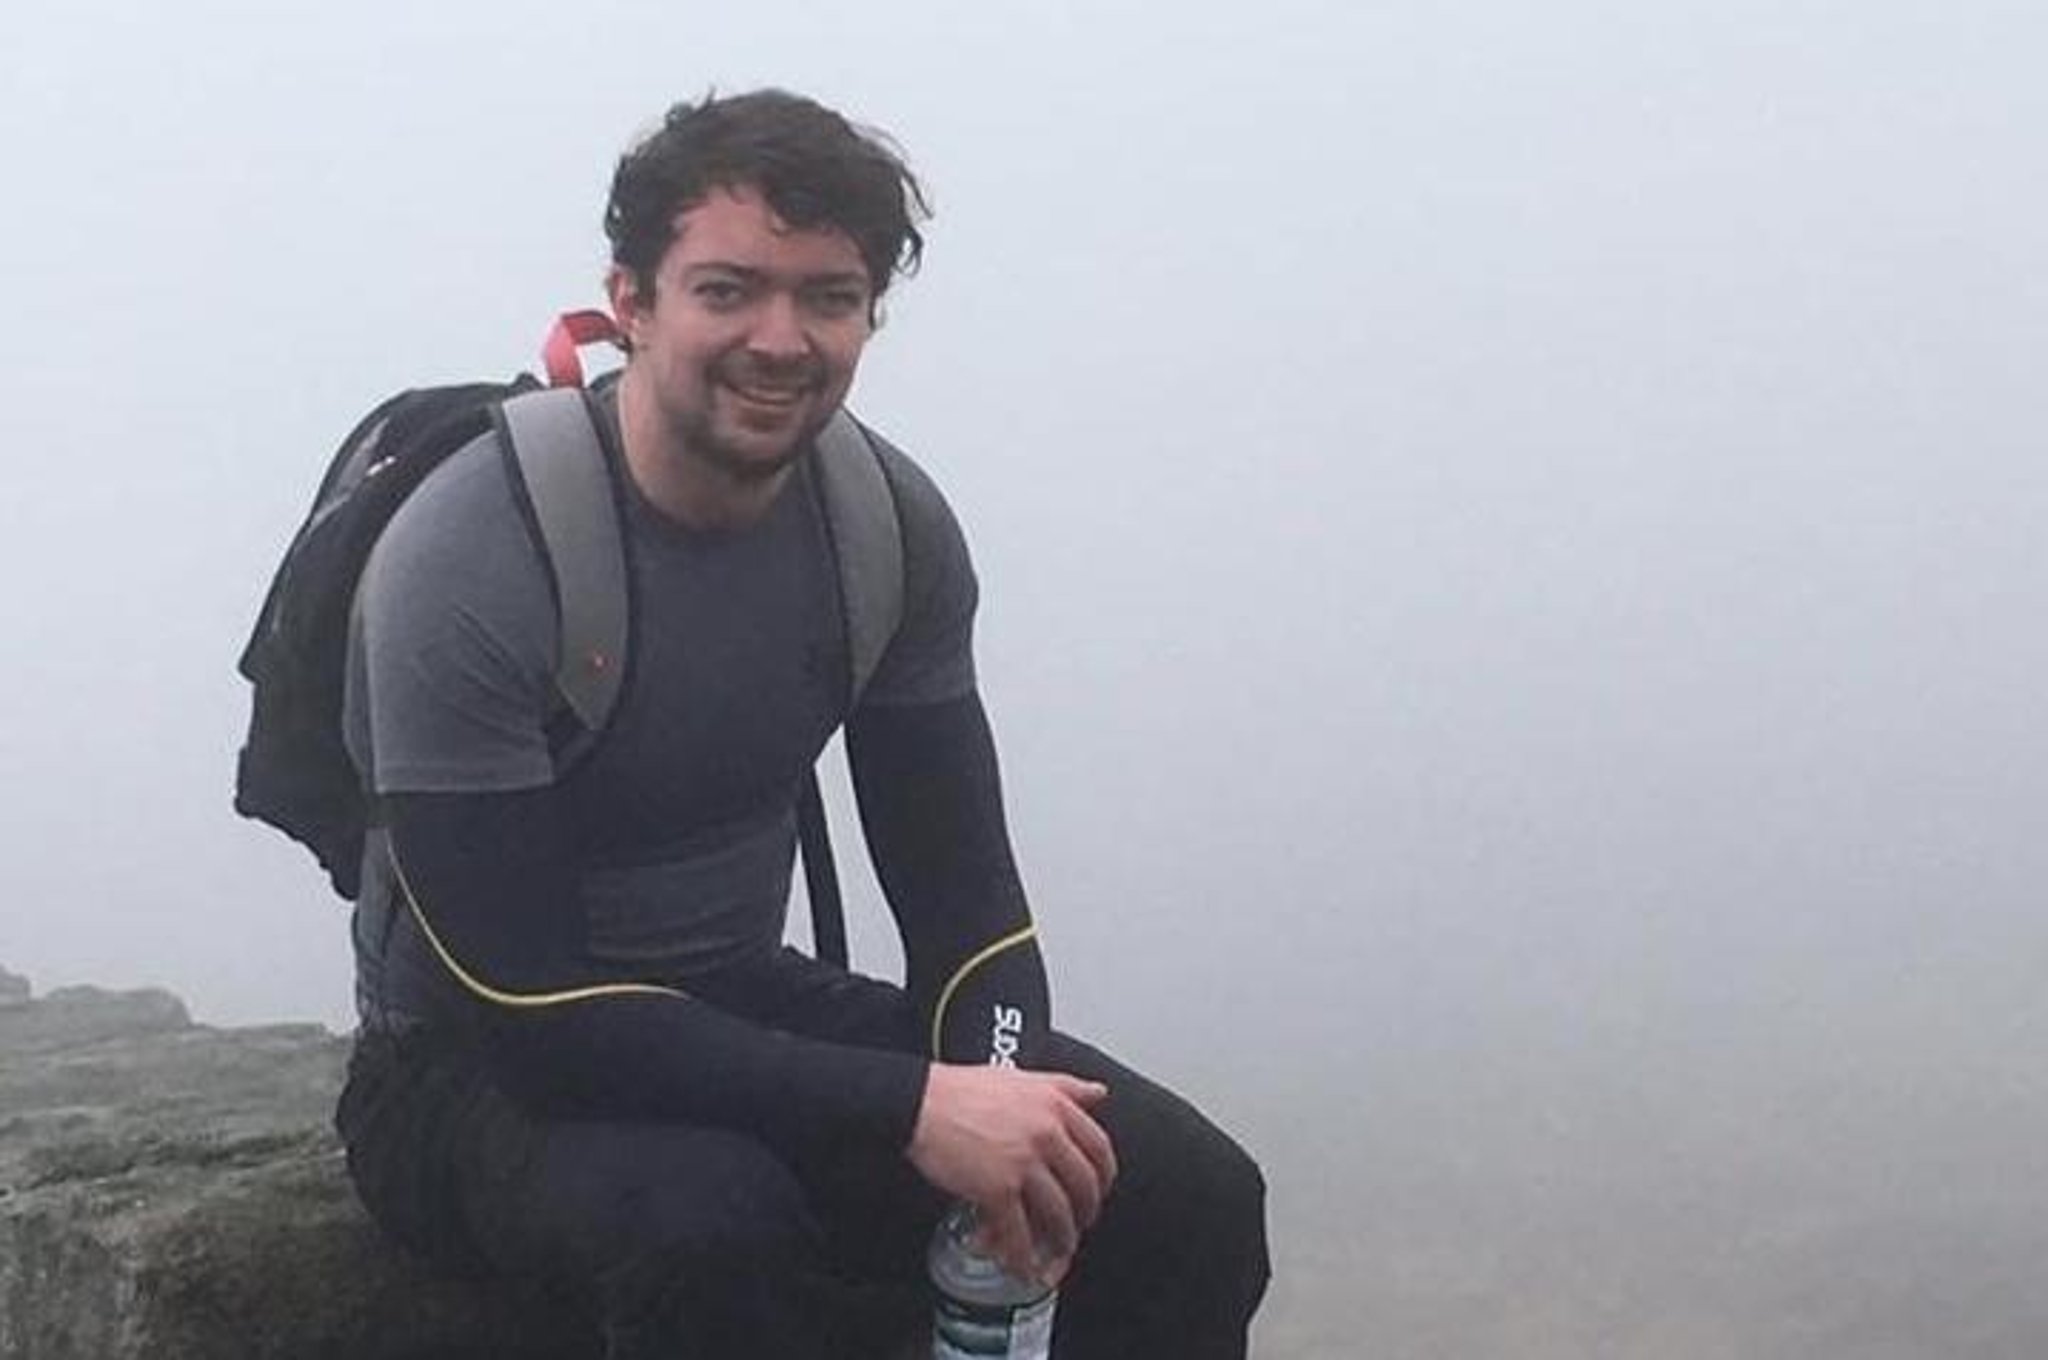 NI man who died on Ben Nevis was going to be dad